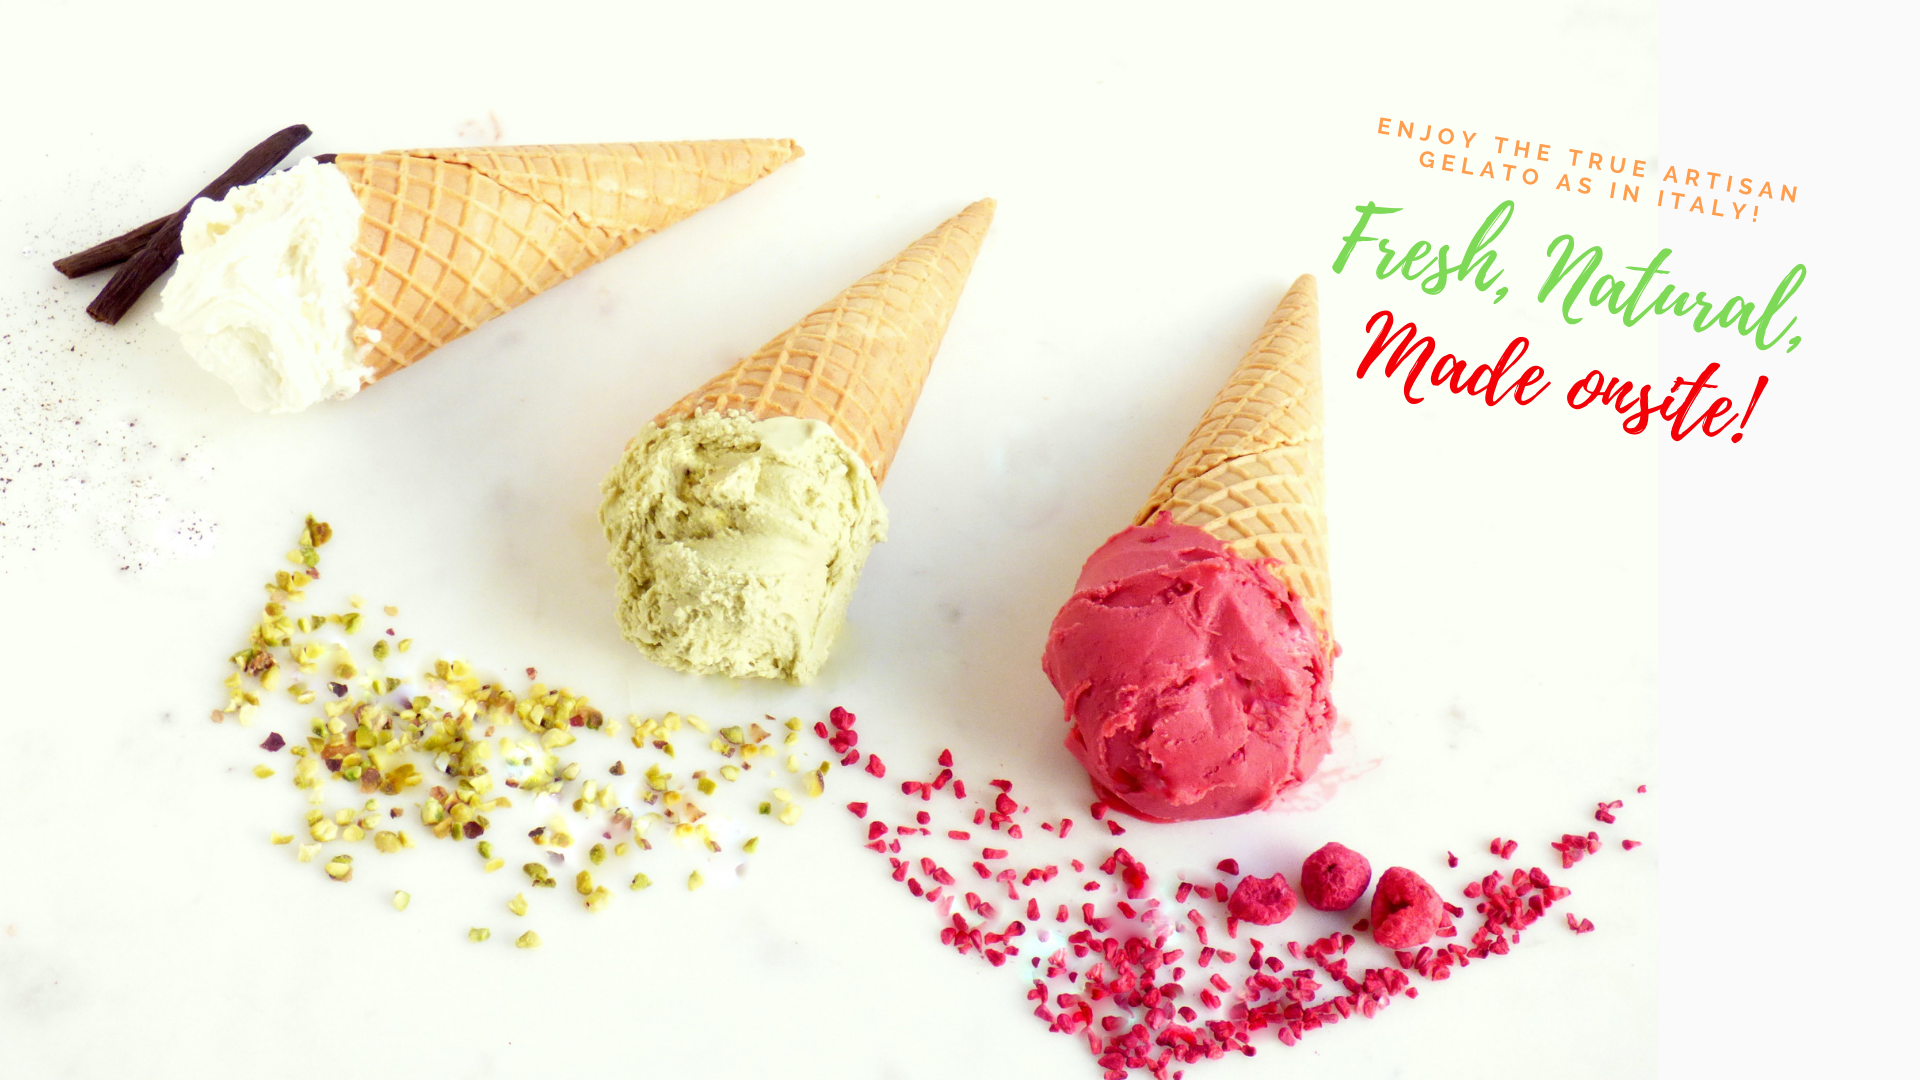 Fresh, natural, made on-site Enjoy the real artisan gelato as in Italy